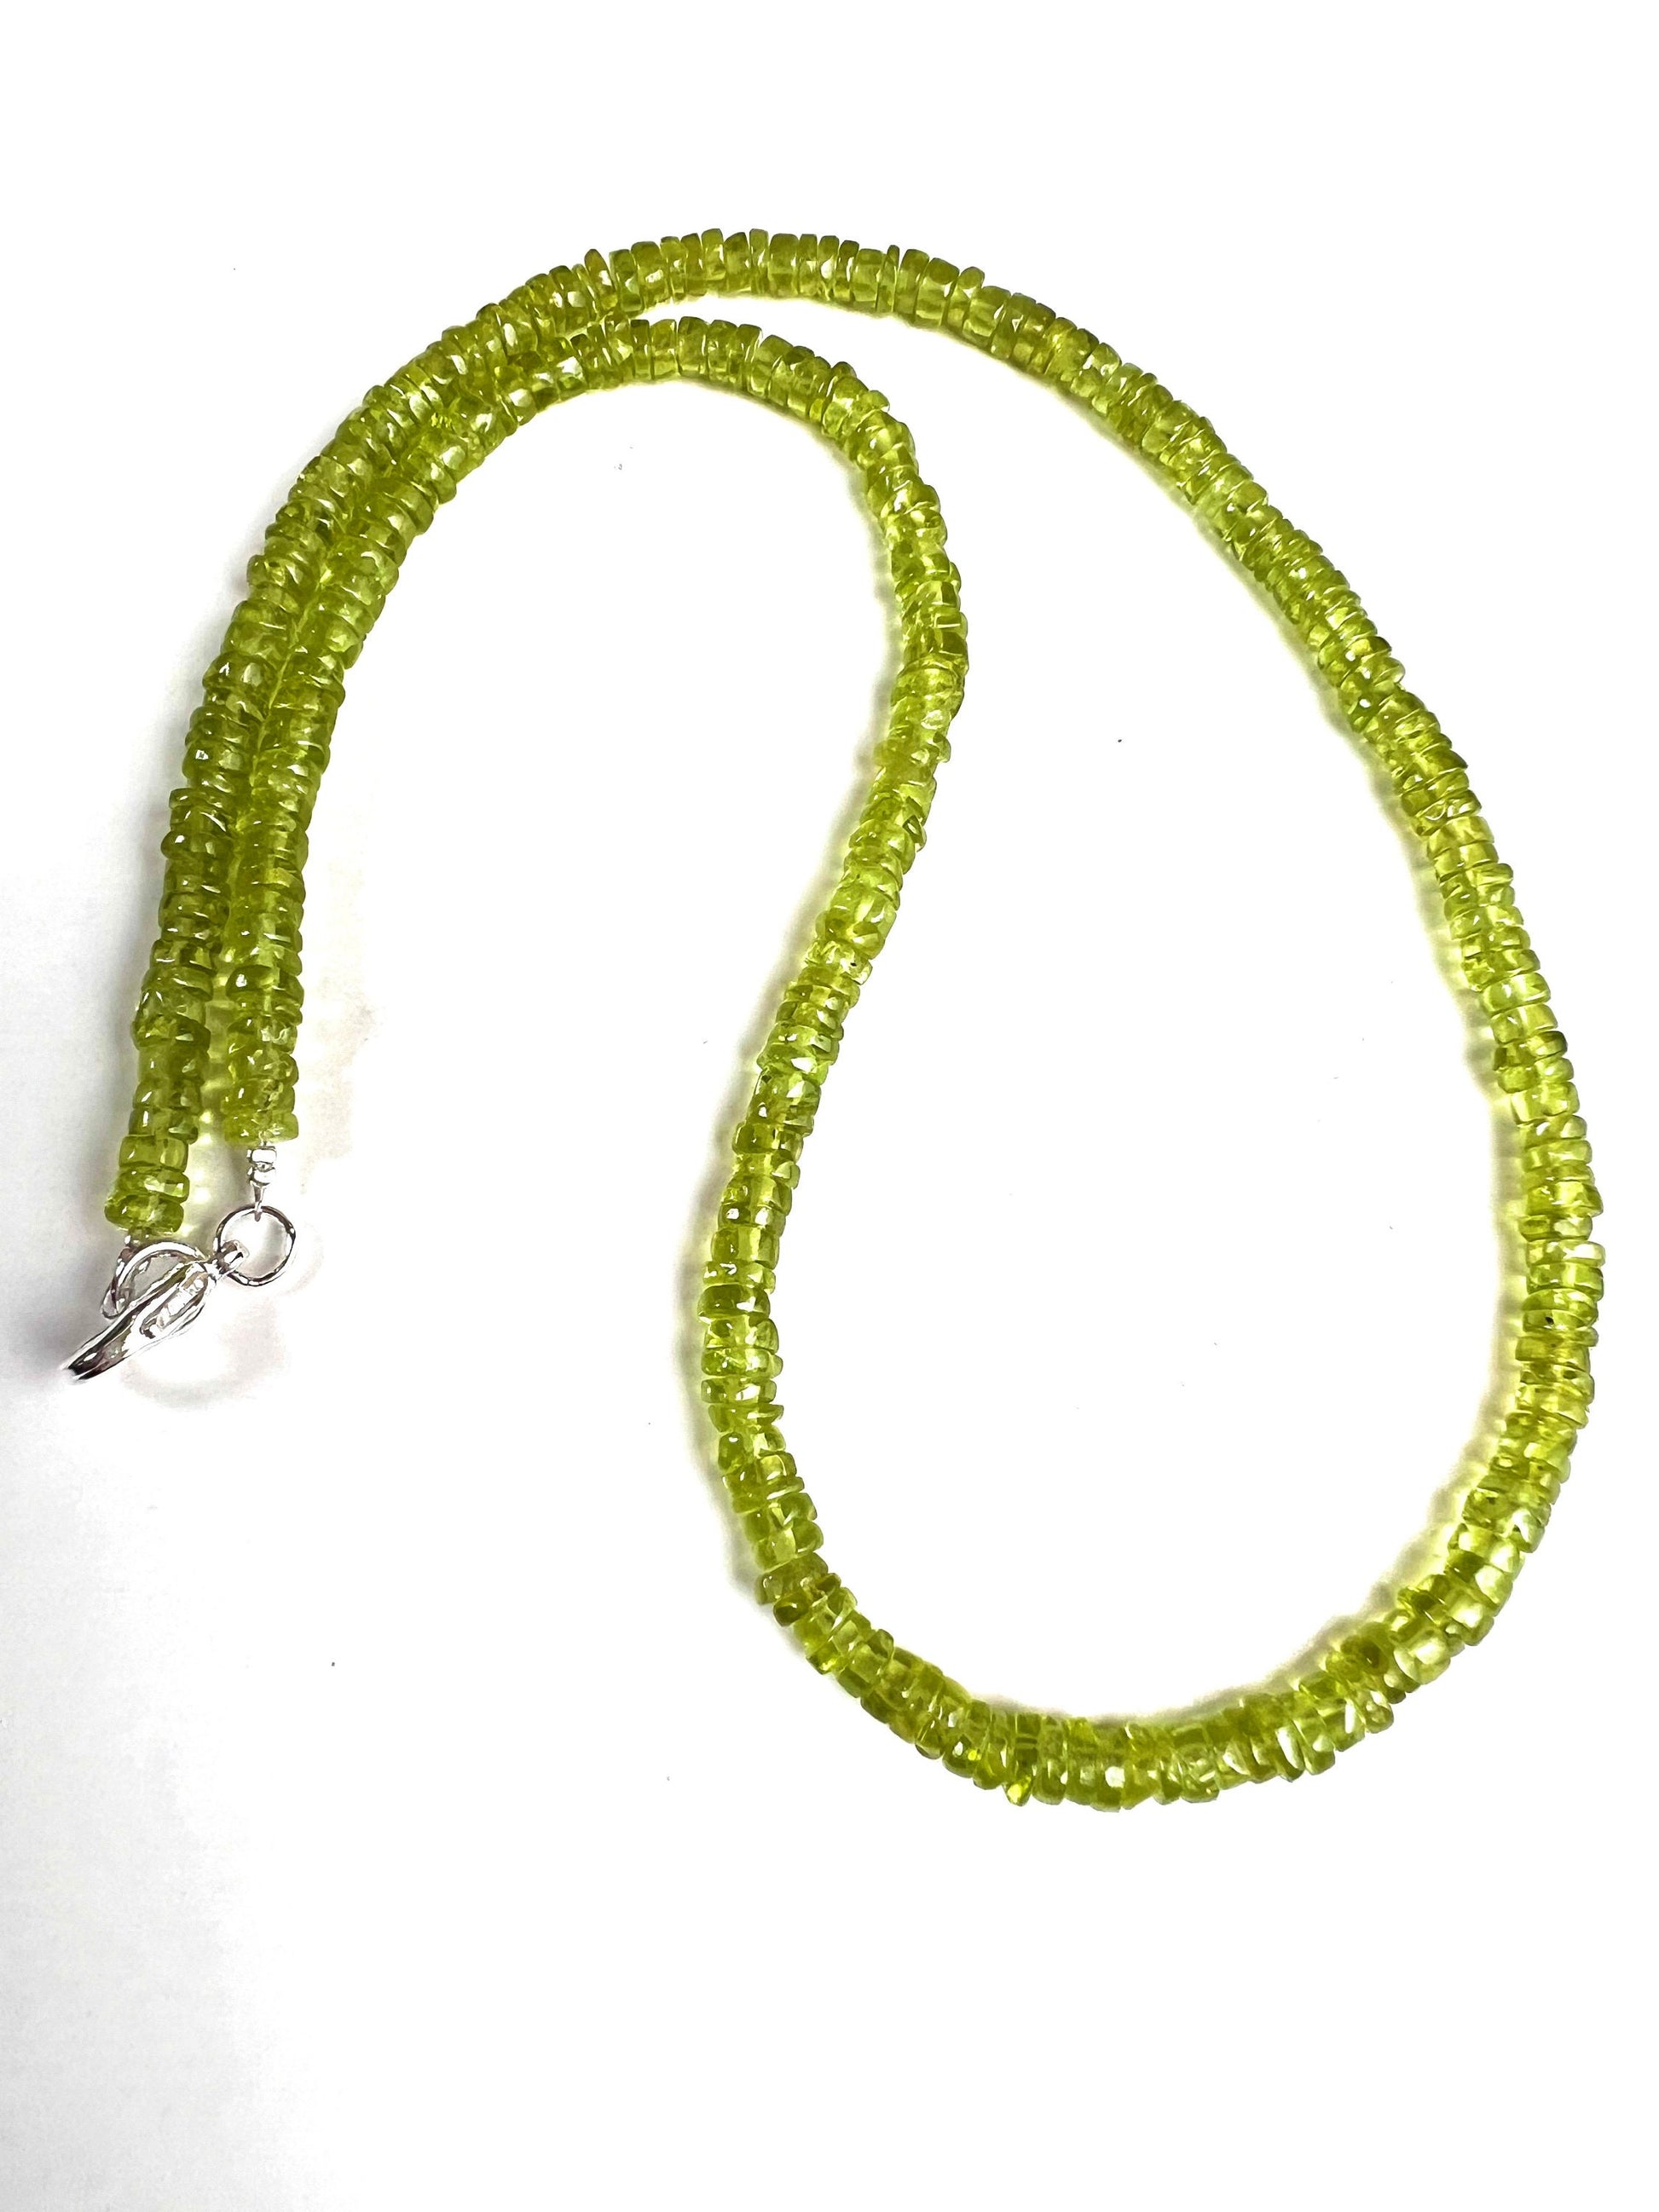 Peridot smooth heishi Necklace,natural peridot AAA quality raw heishi green chakra healing soothing gem August Birthstone Men and women gift